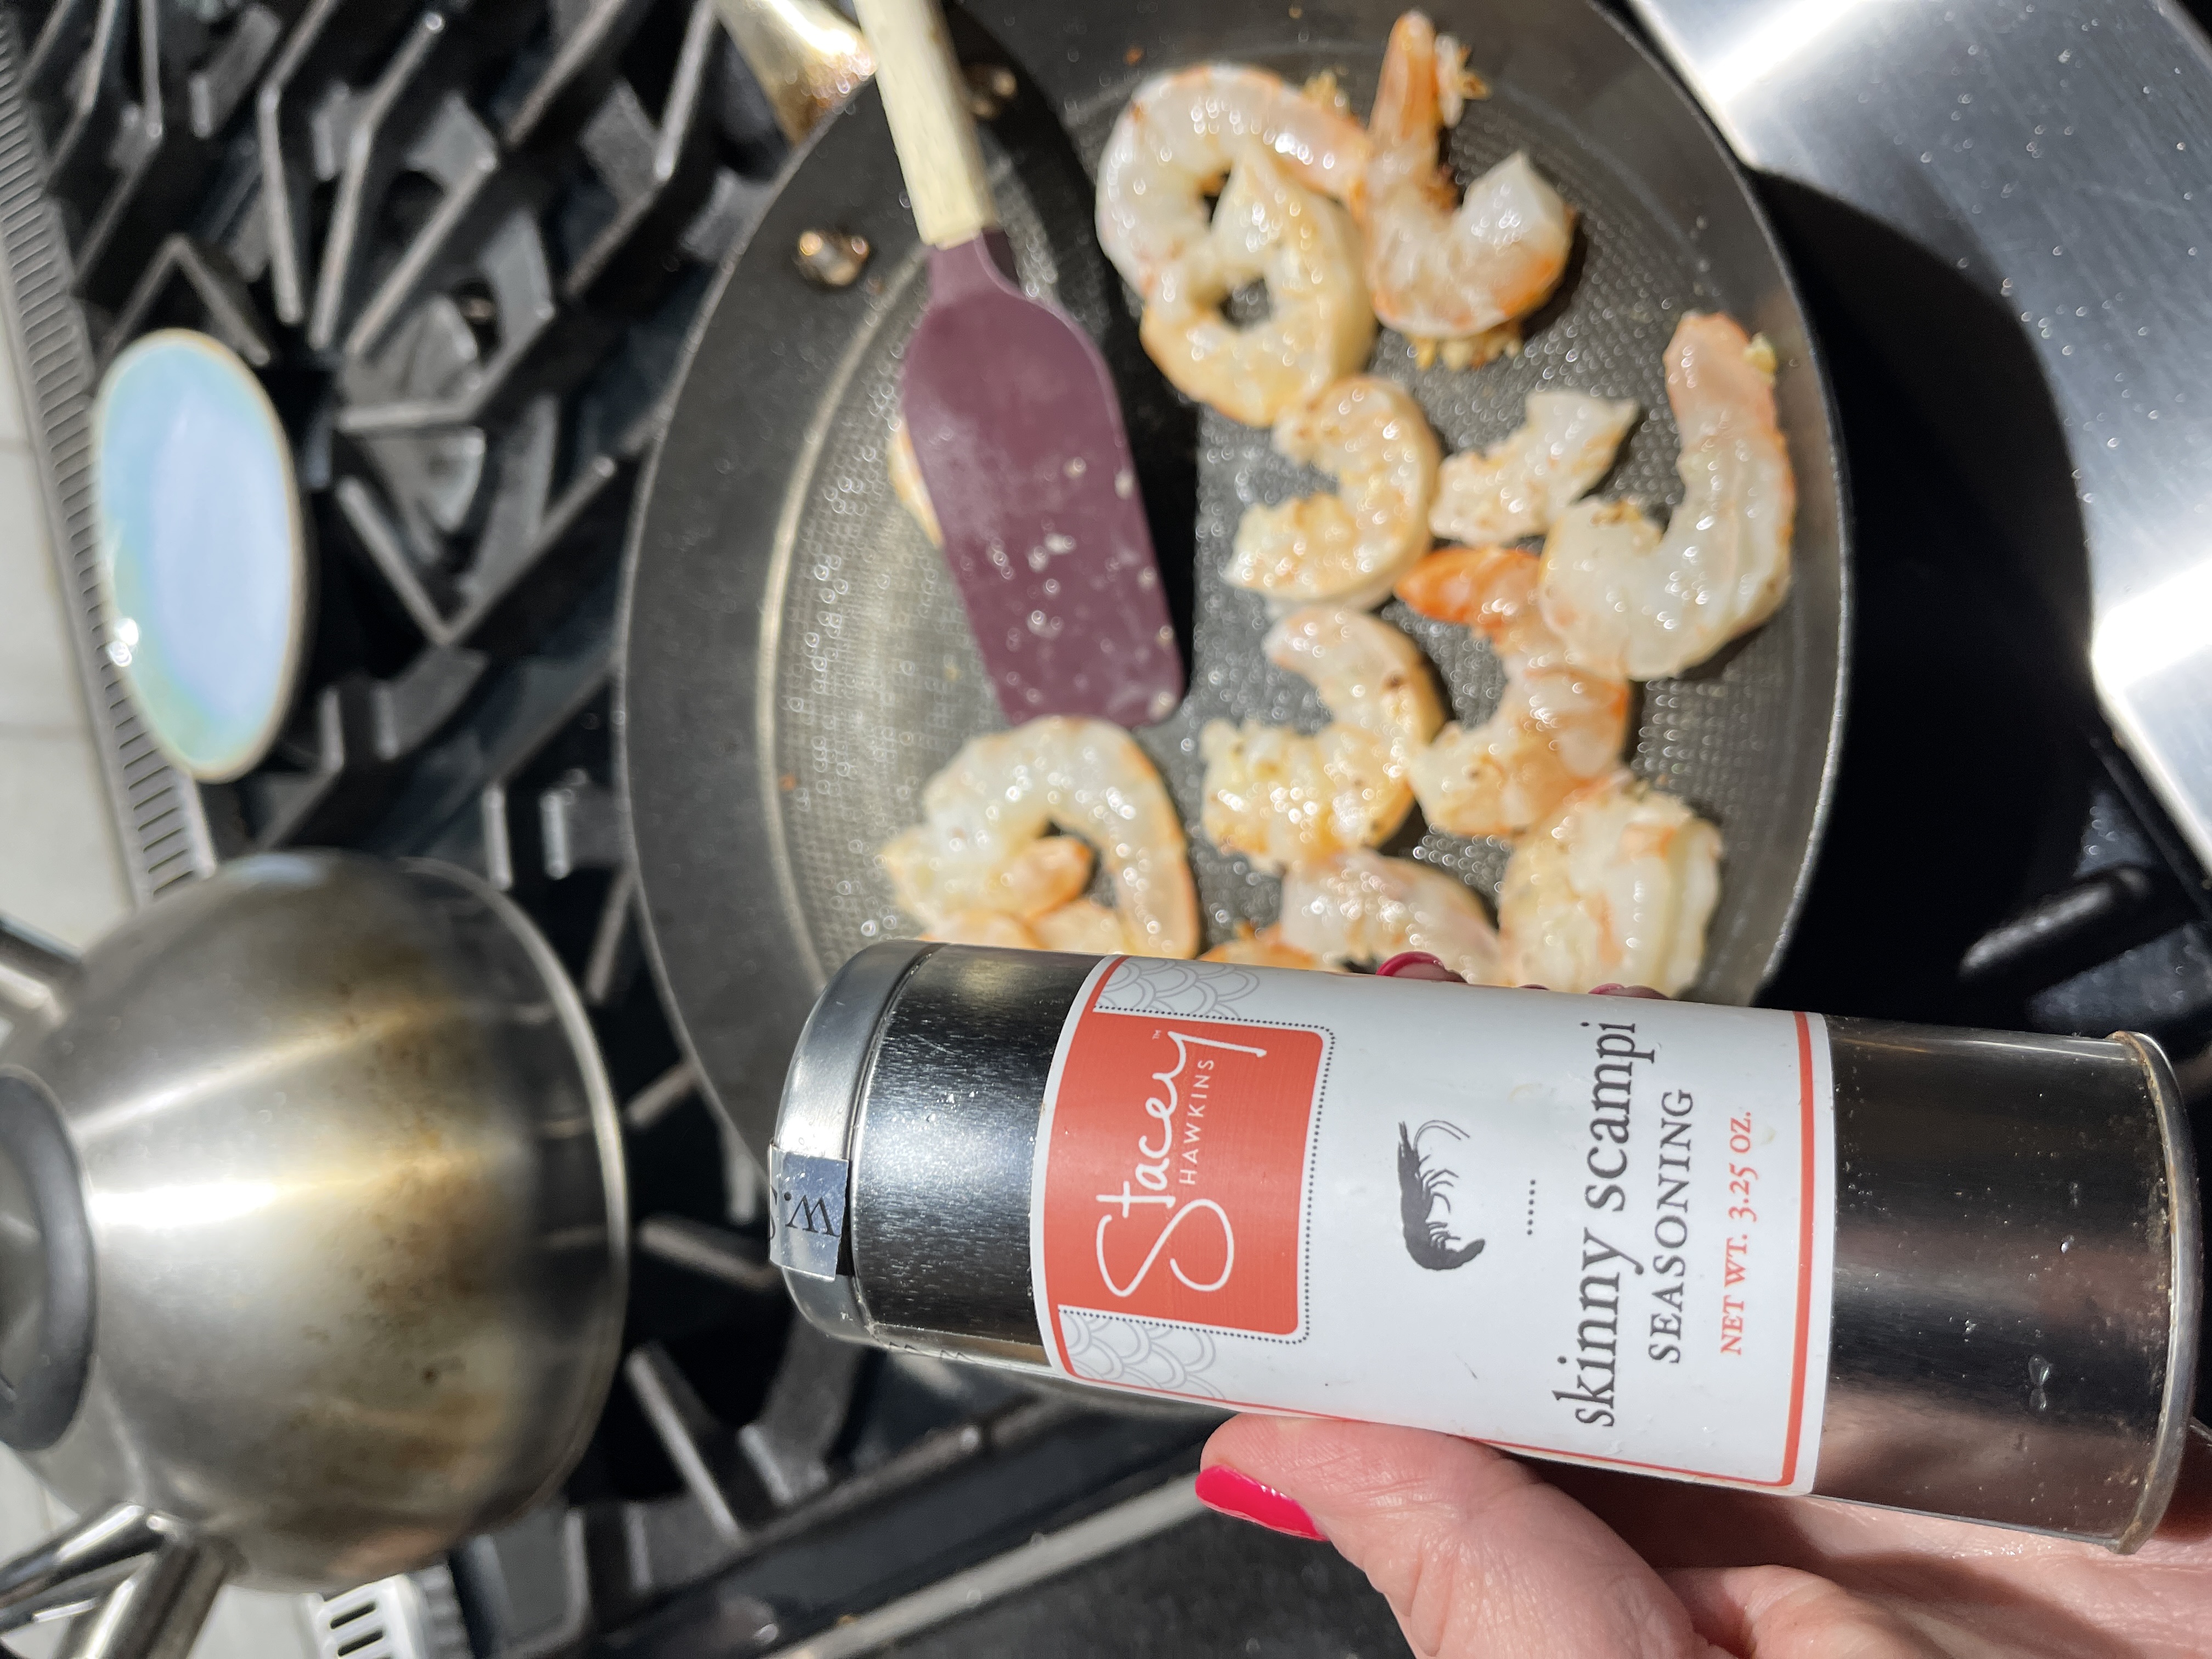 Image of Add shrimp to the pan and sprinkle with Skinny Scampi...